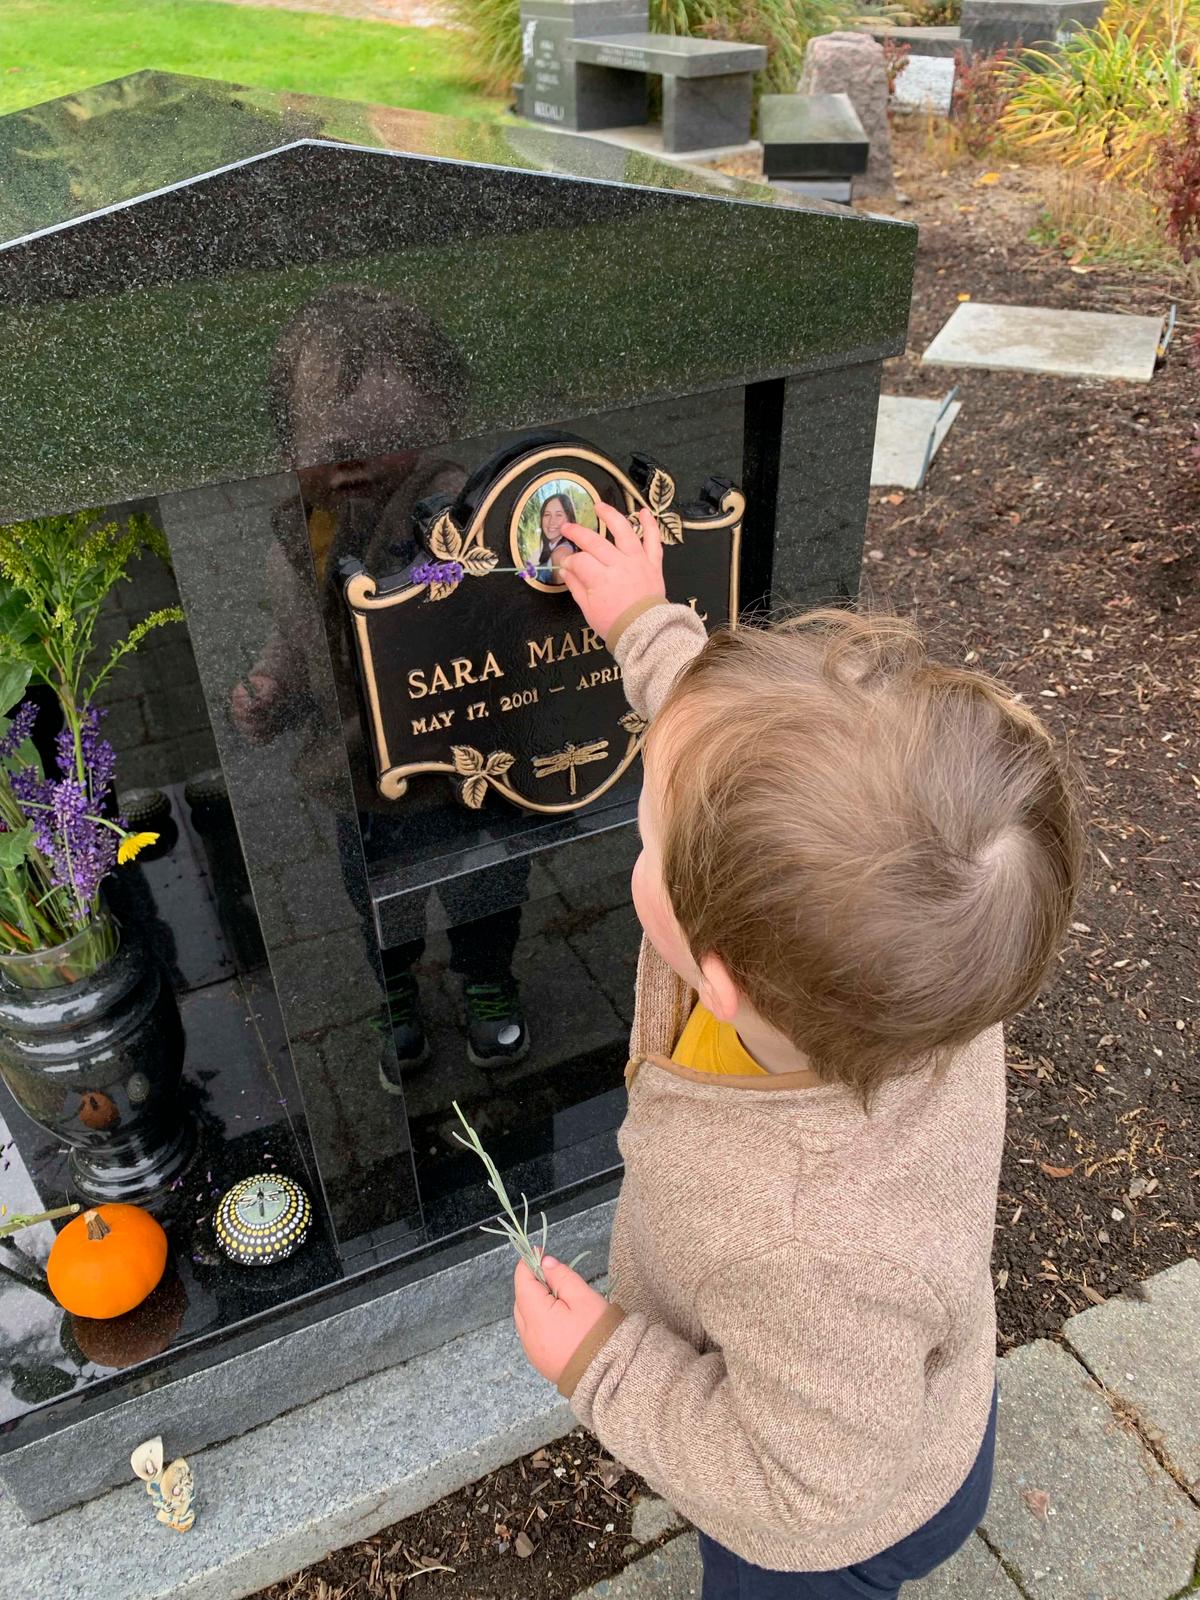 Lochlan, 2, at his mother's graveside memorial. (Courtesy of Lisa Marshall)